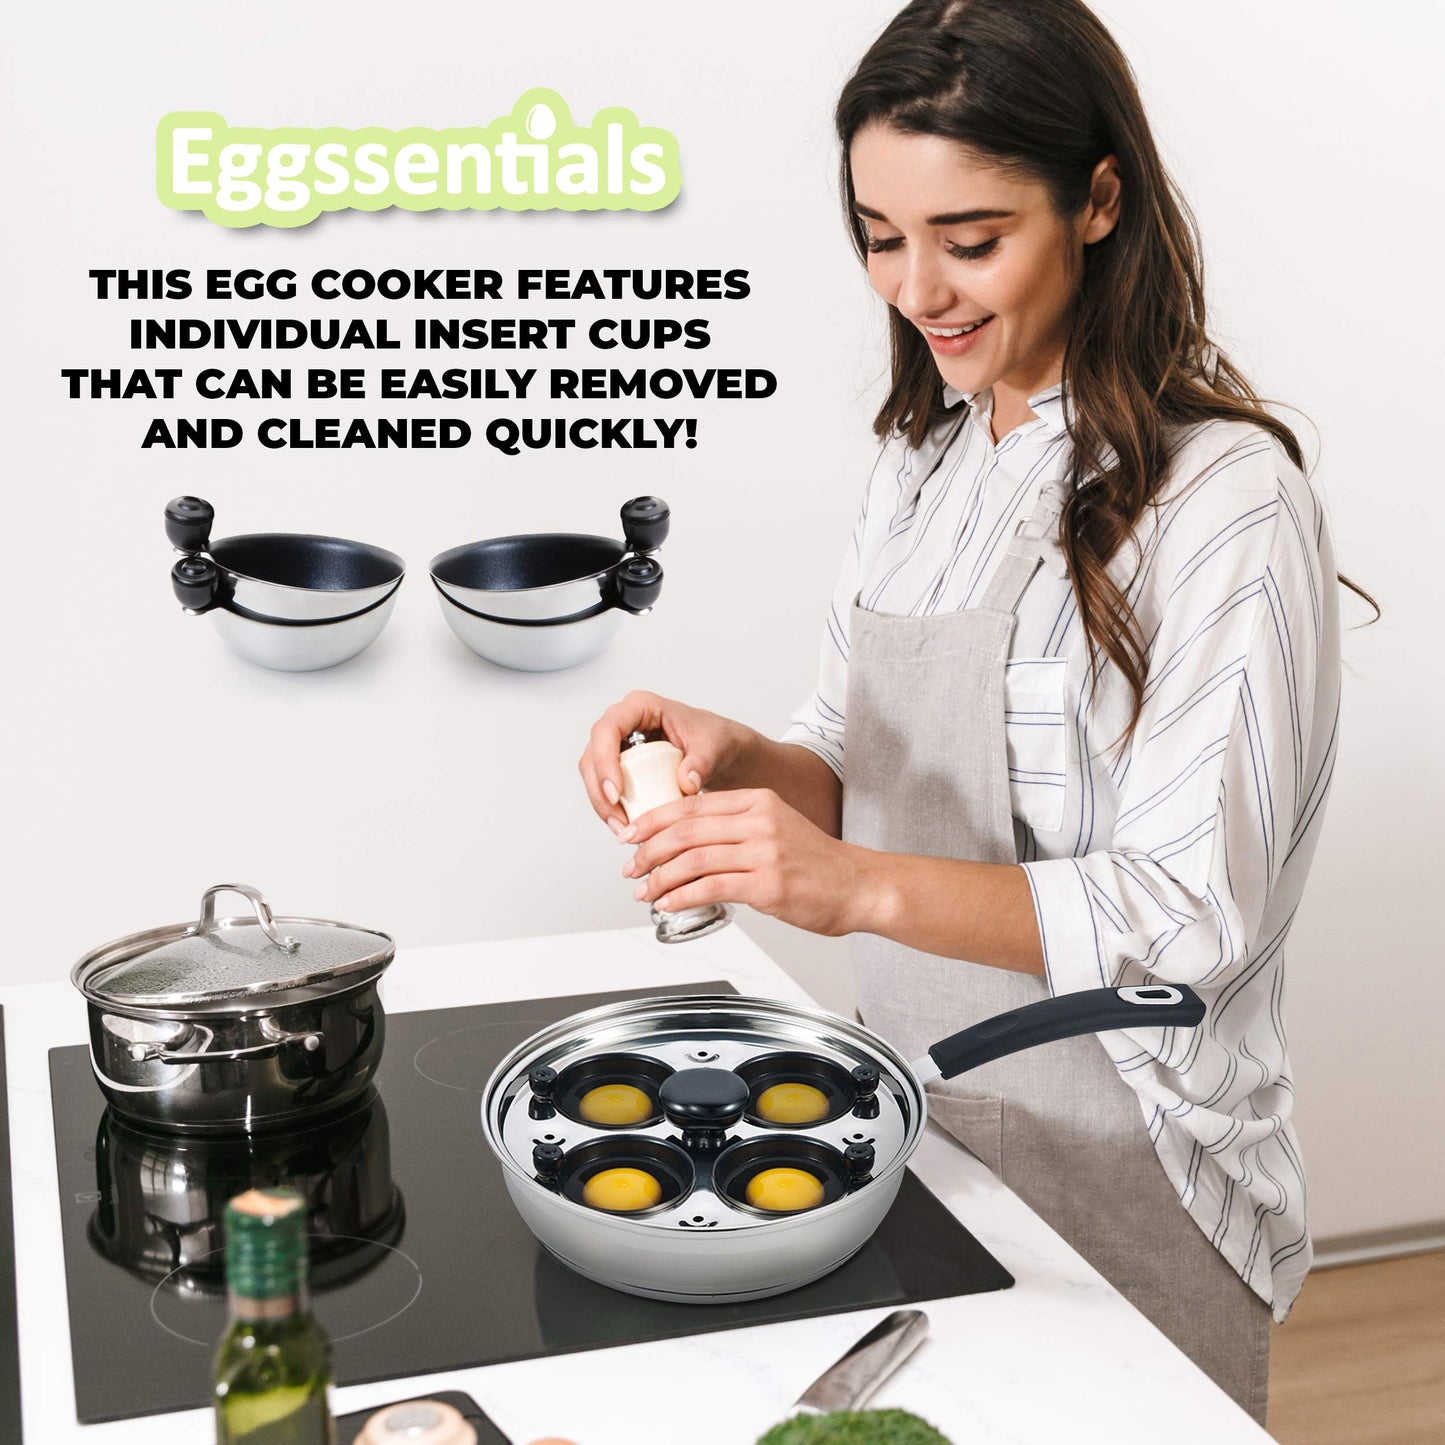 Egg Poacher - Eggssentials Poached Egg Maker, Stainless Steel Egg Poaching Pan, Poached Eggs Cooker Food Grade Safe PFOA Free with Spatula